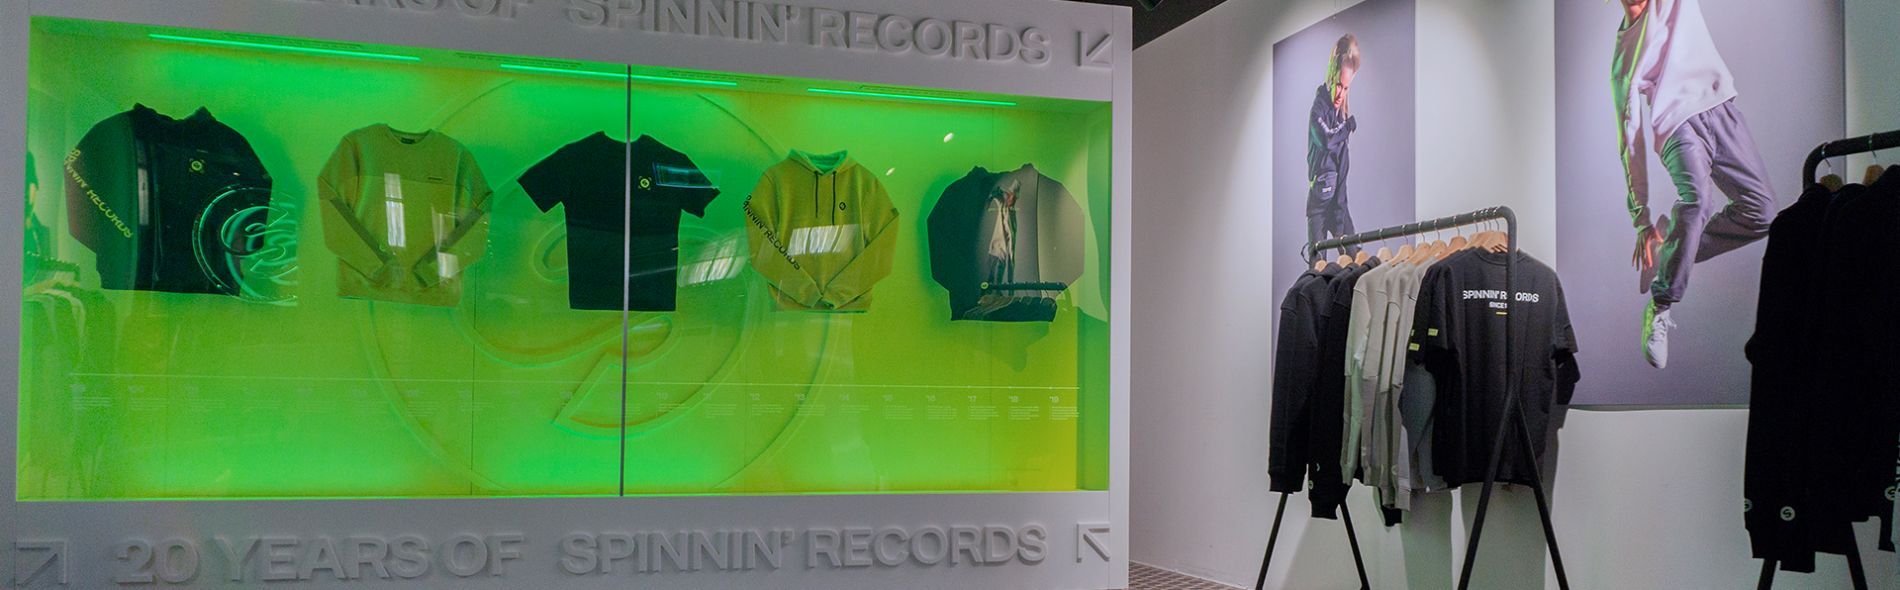 Spinnin' Records ADE Pop-up store 2019